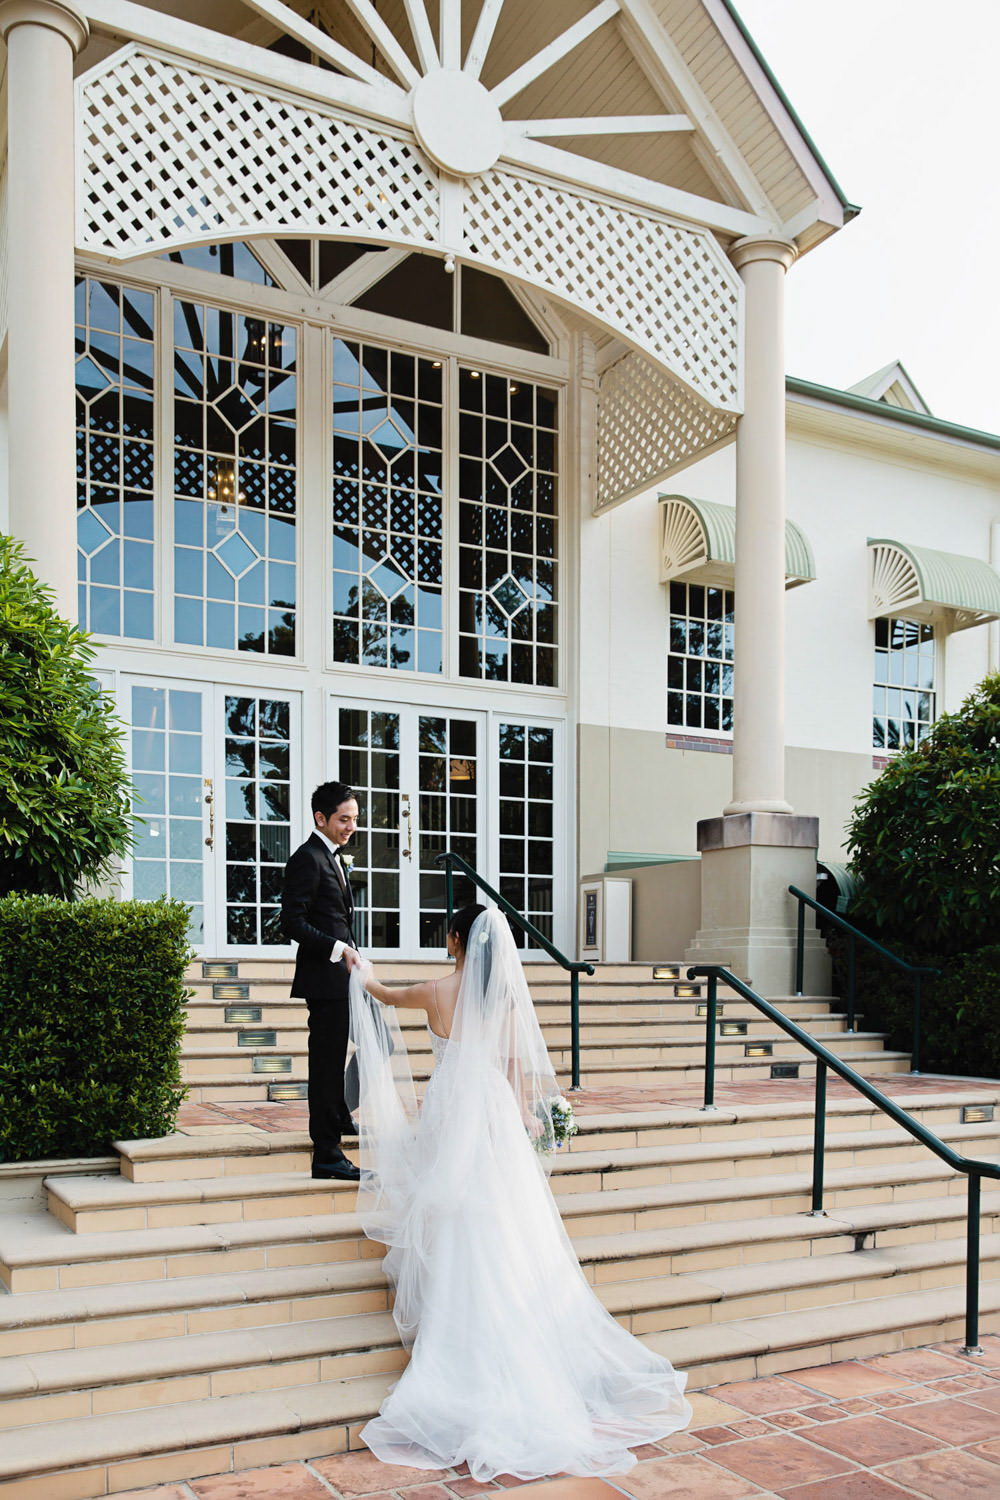 staircase_Sanctuary-cove-wedding-photography_quincenmulberrystudios